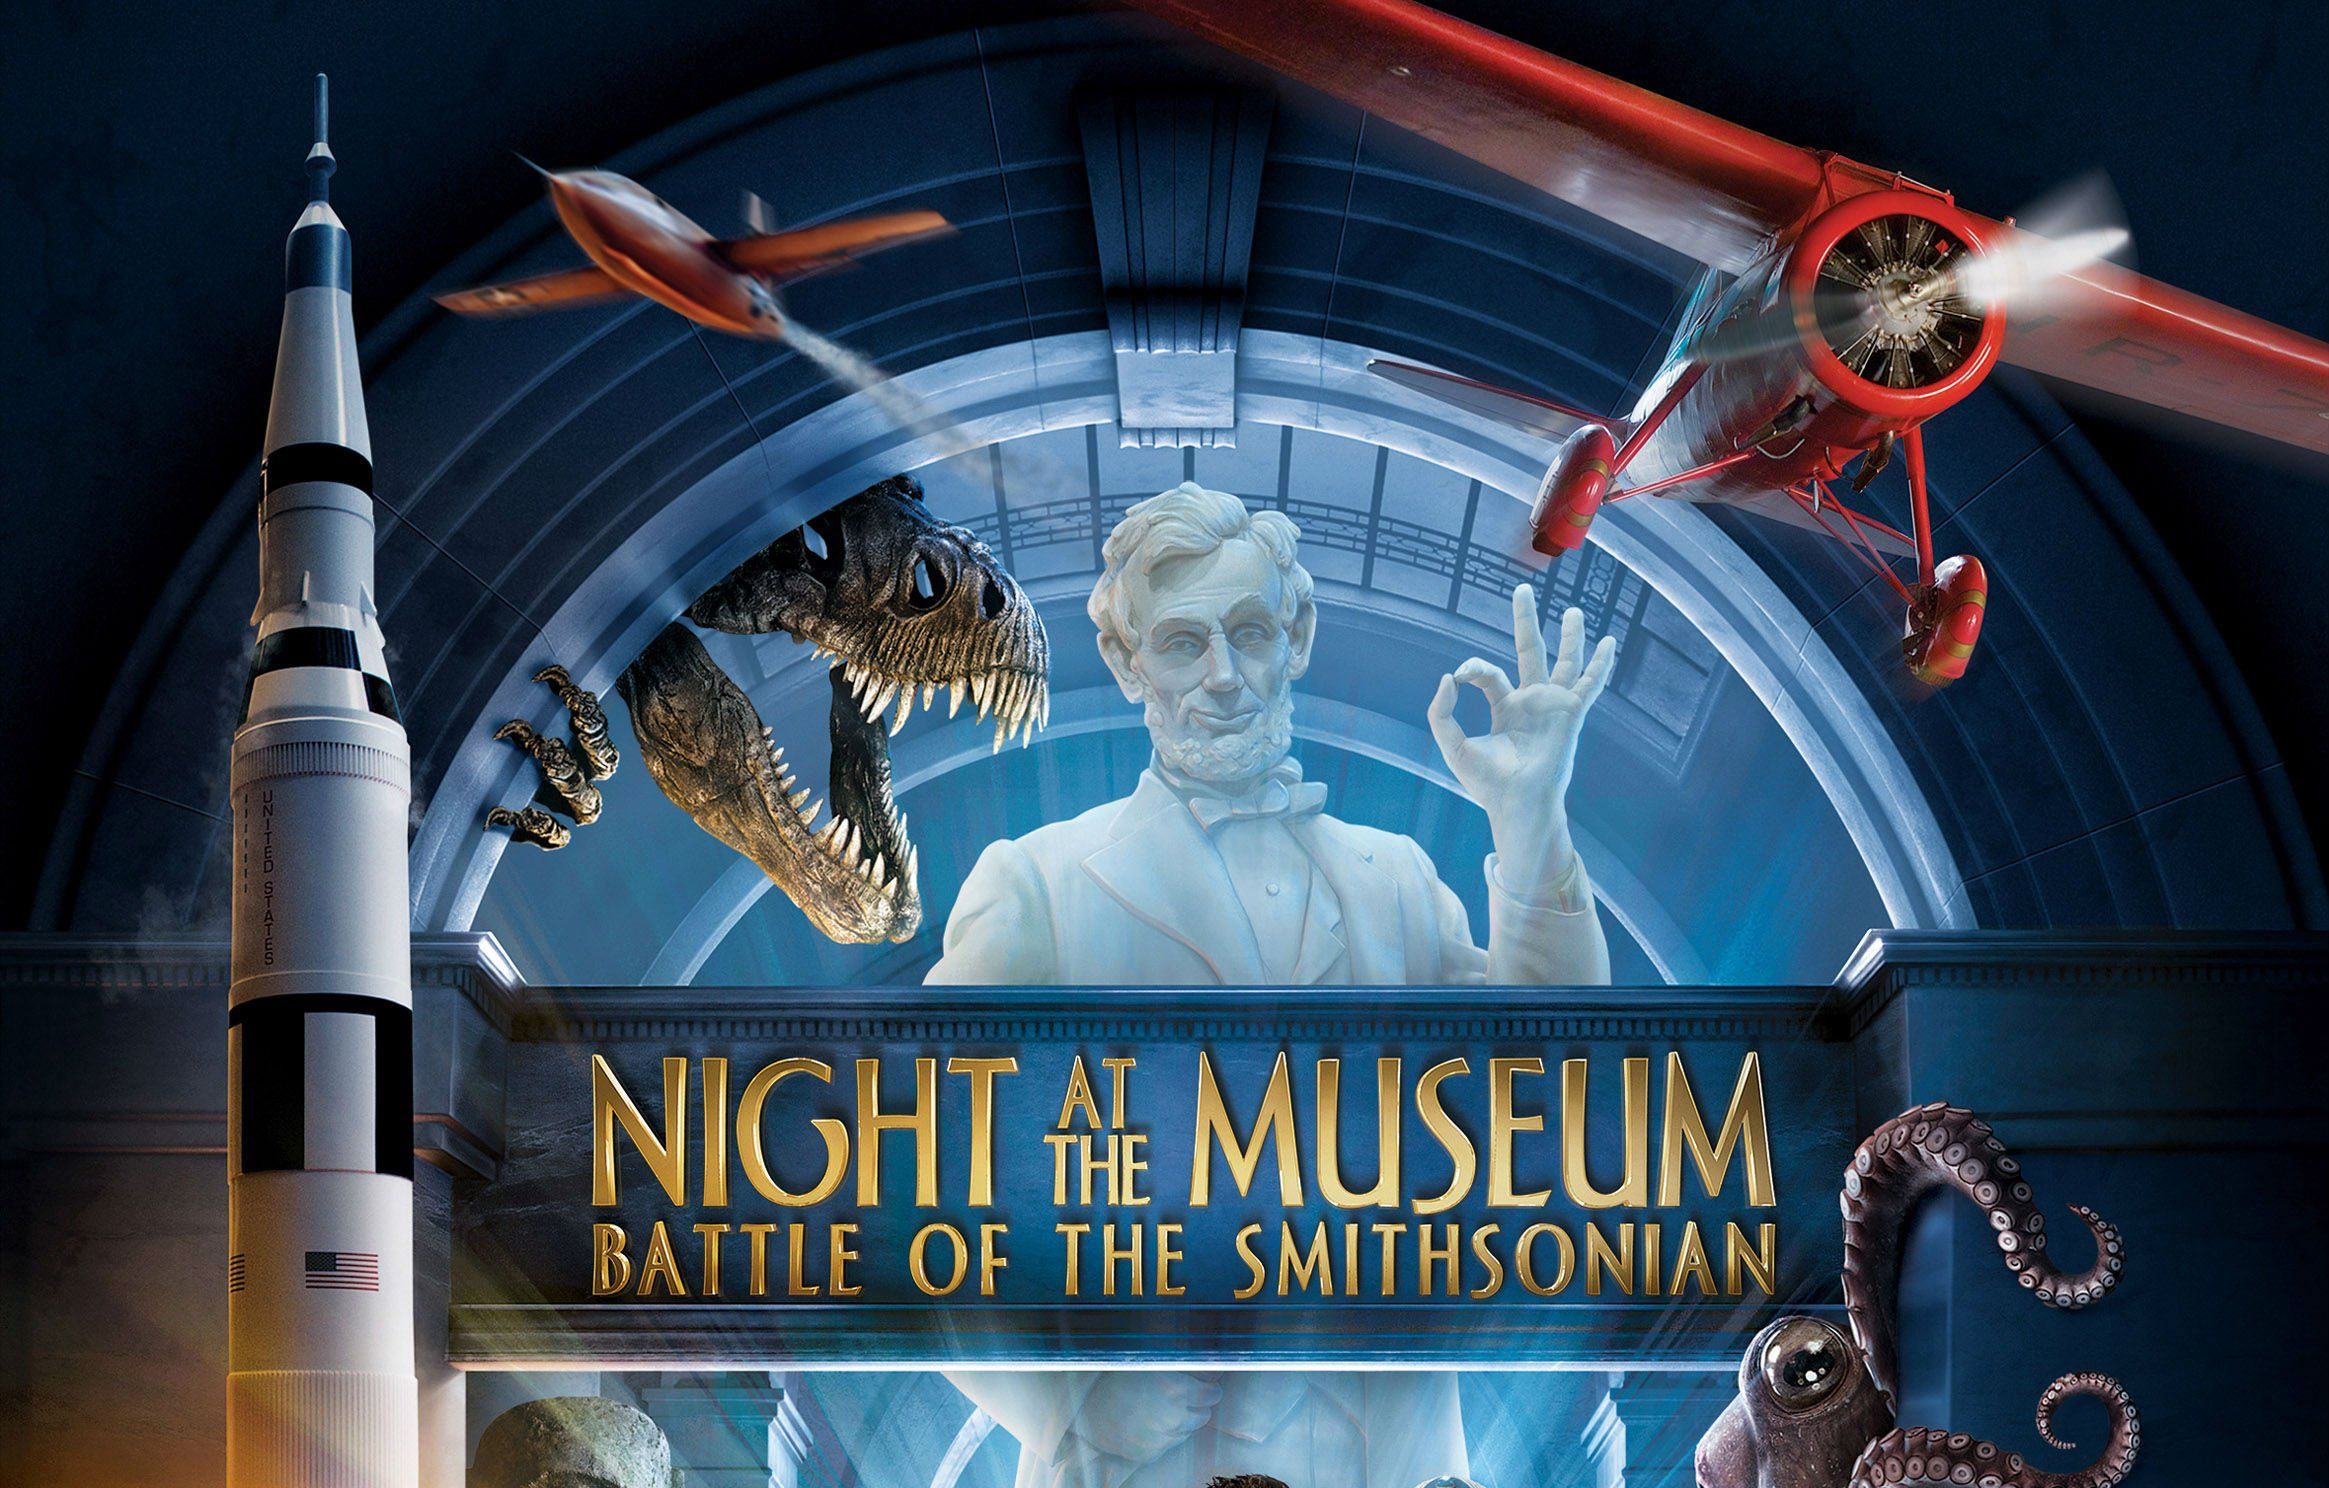 NIGHT AT THE MUSEUM action adventure comedy fantasy wallpaper